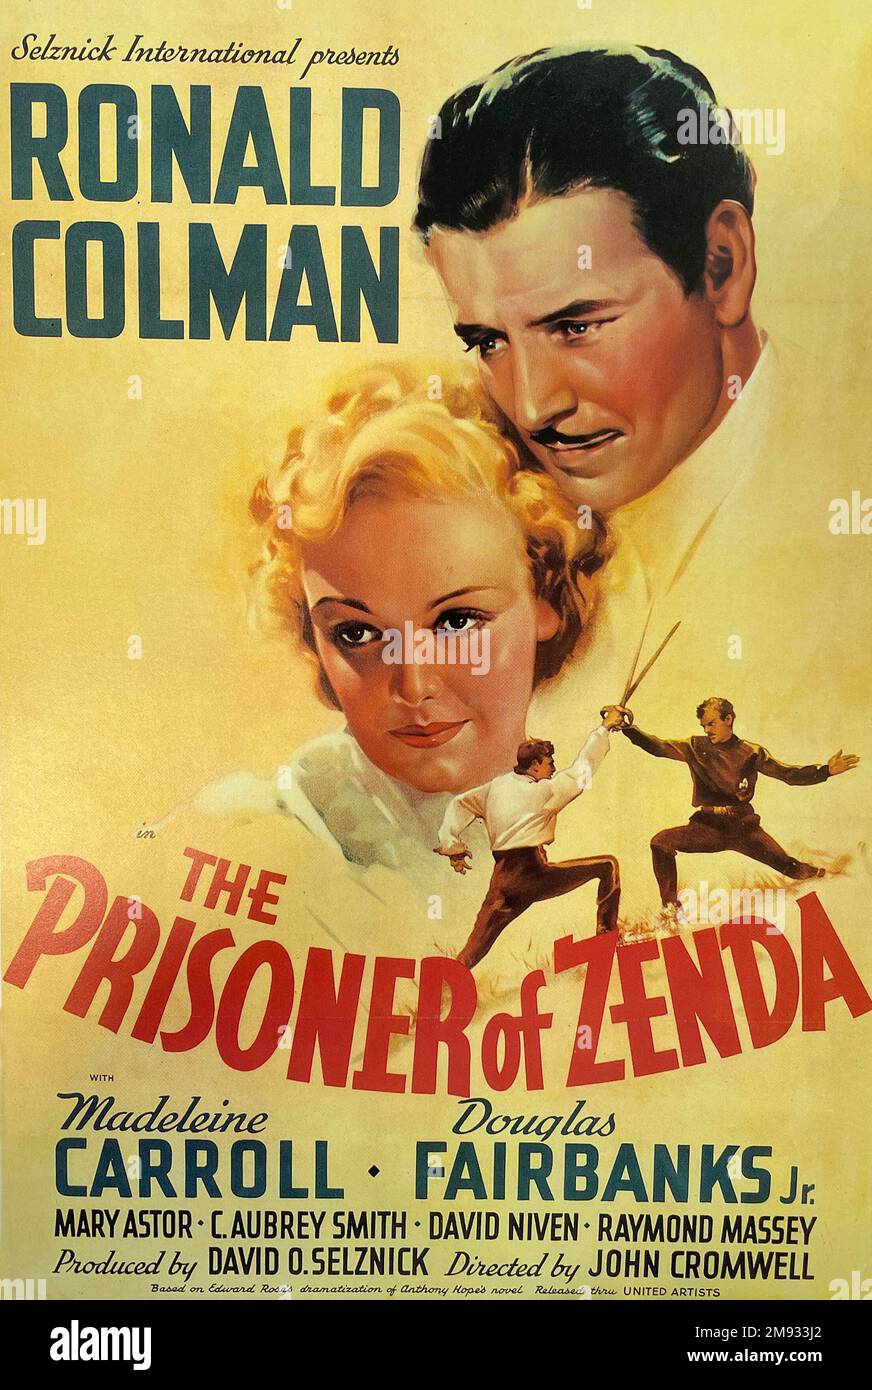 THE PRISONER OF ZENDA 1937 United Artists film with Ronald Coleman and Madeleine Carroll Stock Photo